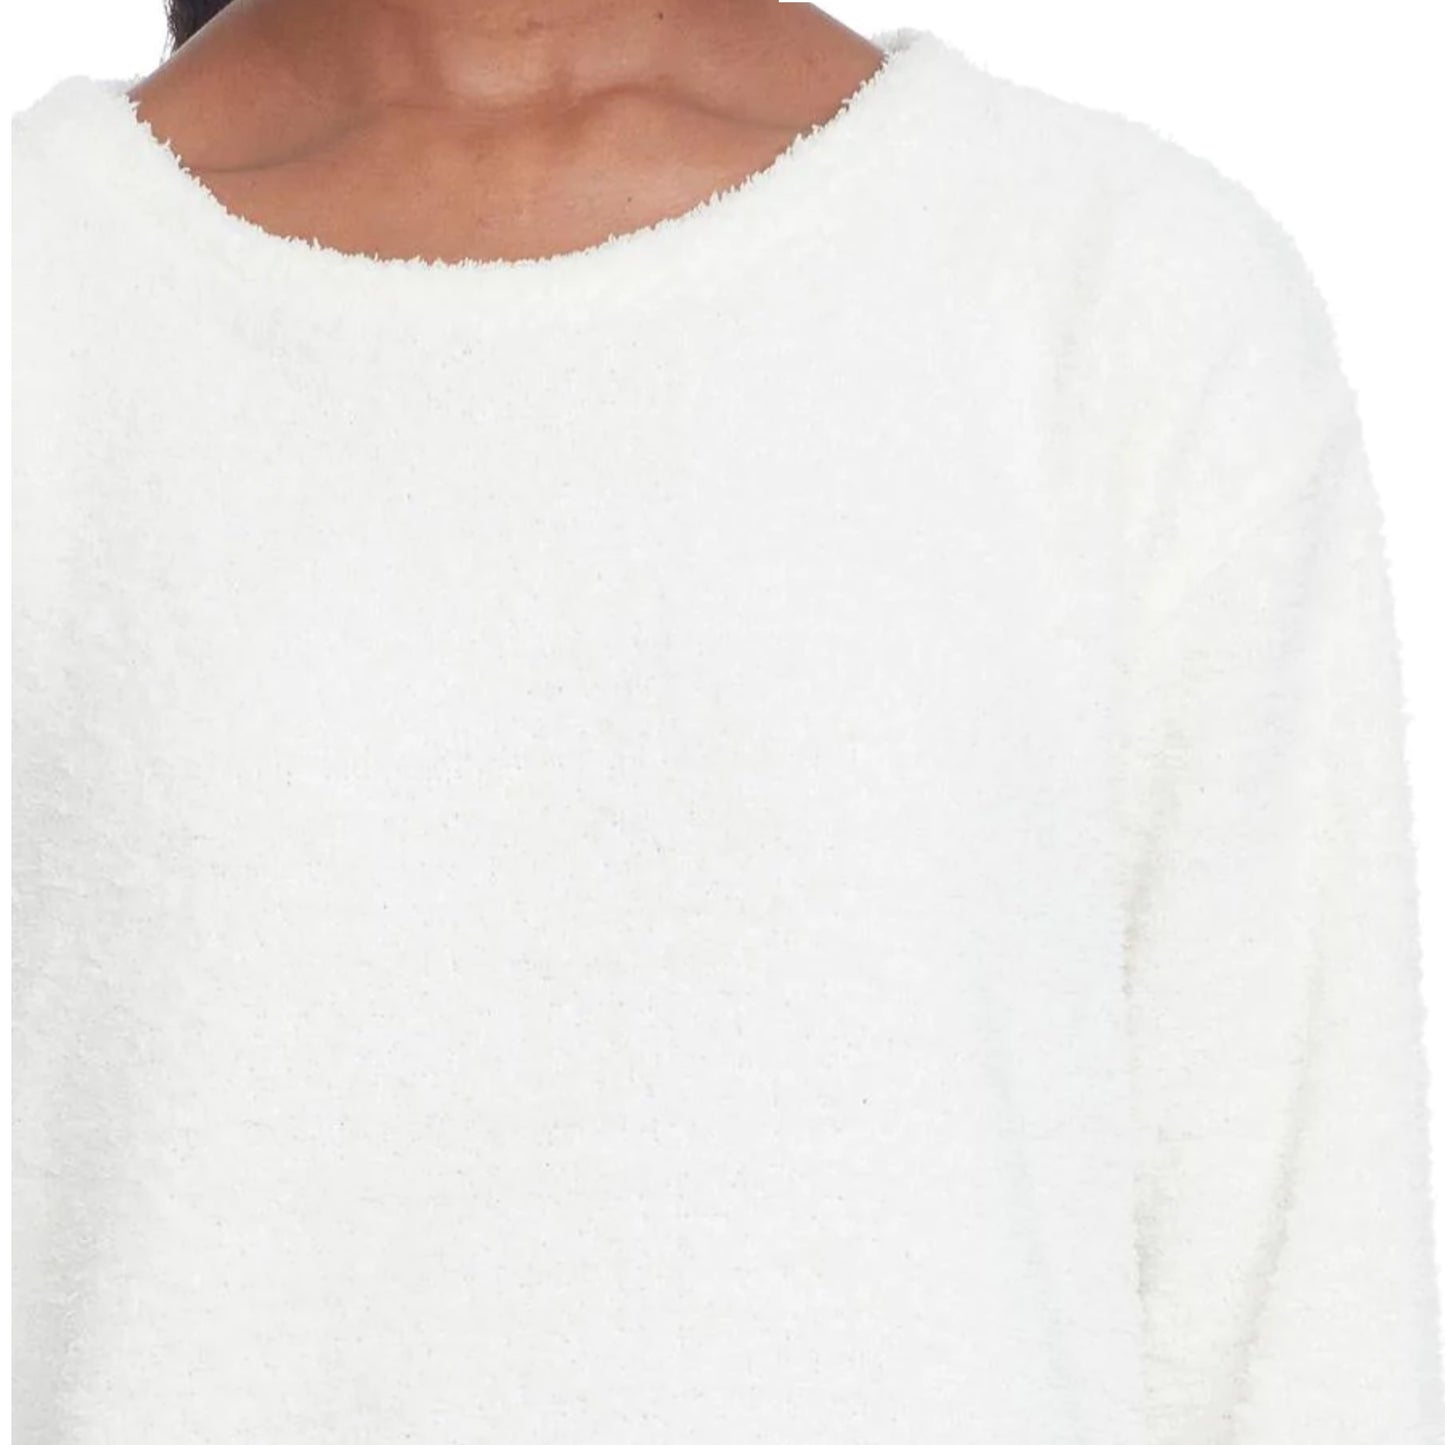 Marc New York Women's Ultra Soft Fuzzy Knit Sweater Crew Neck Cozy Pullover Top